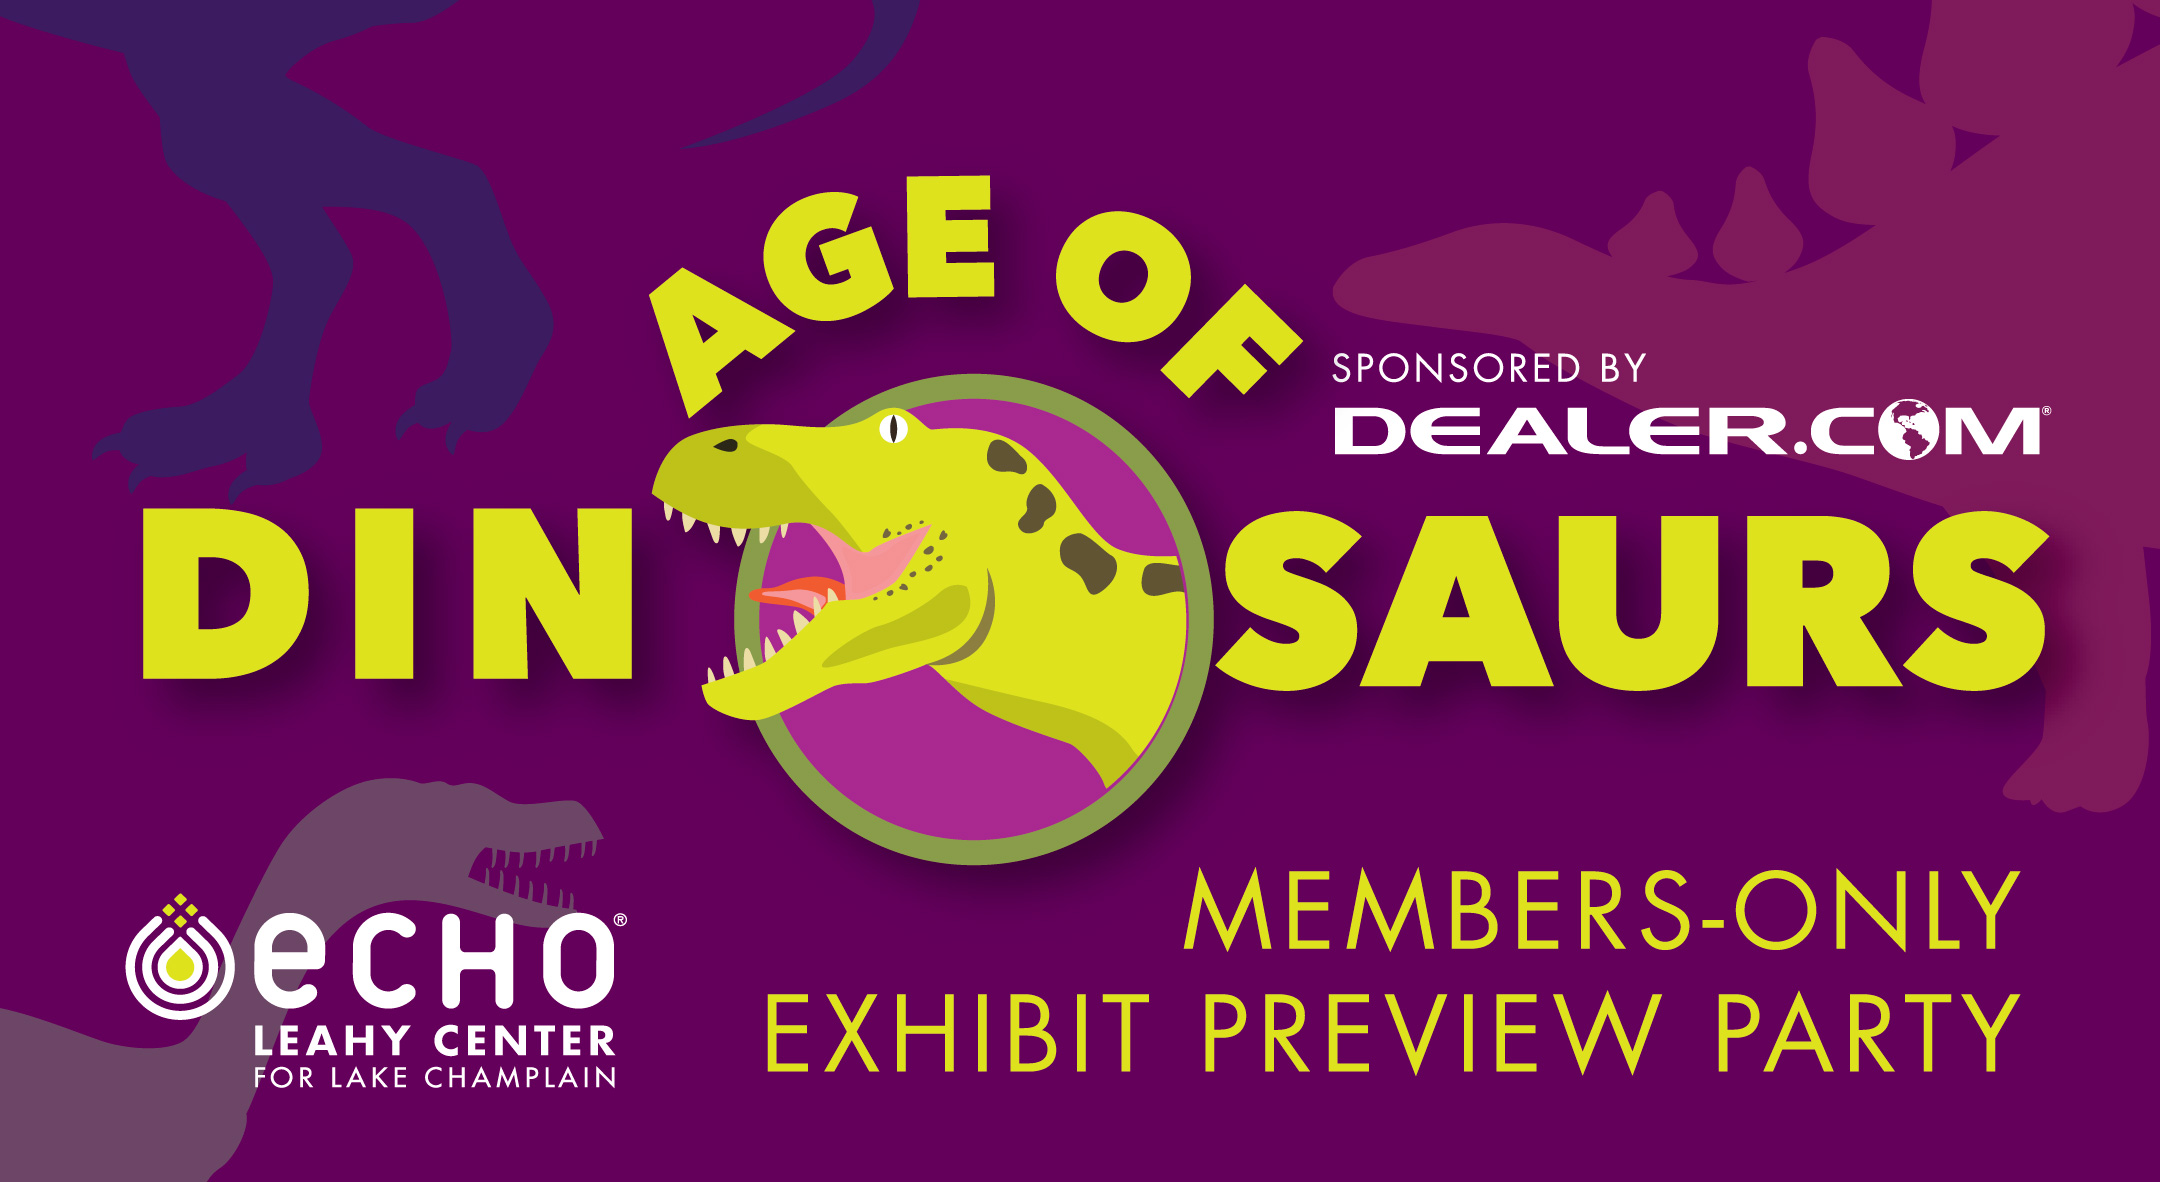 Age of Dinosaurs Members-Only Exhibit Preview Party